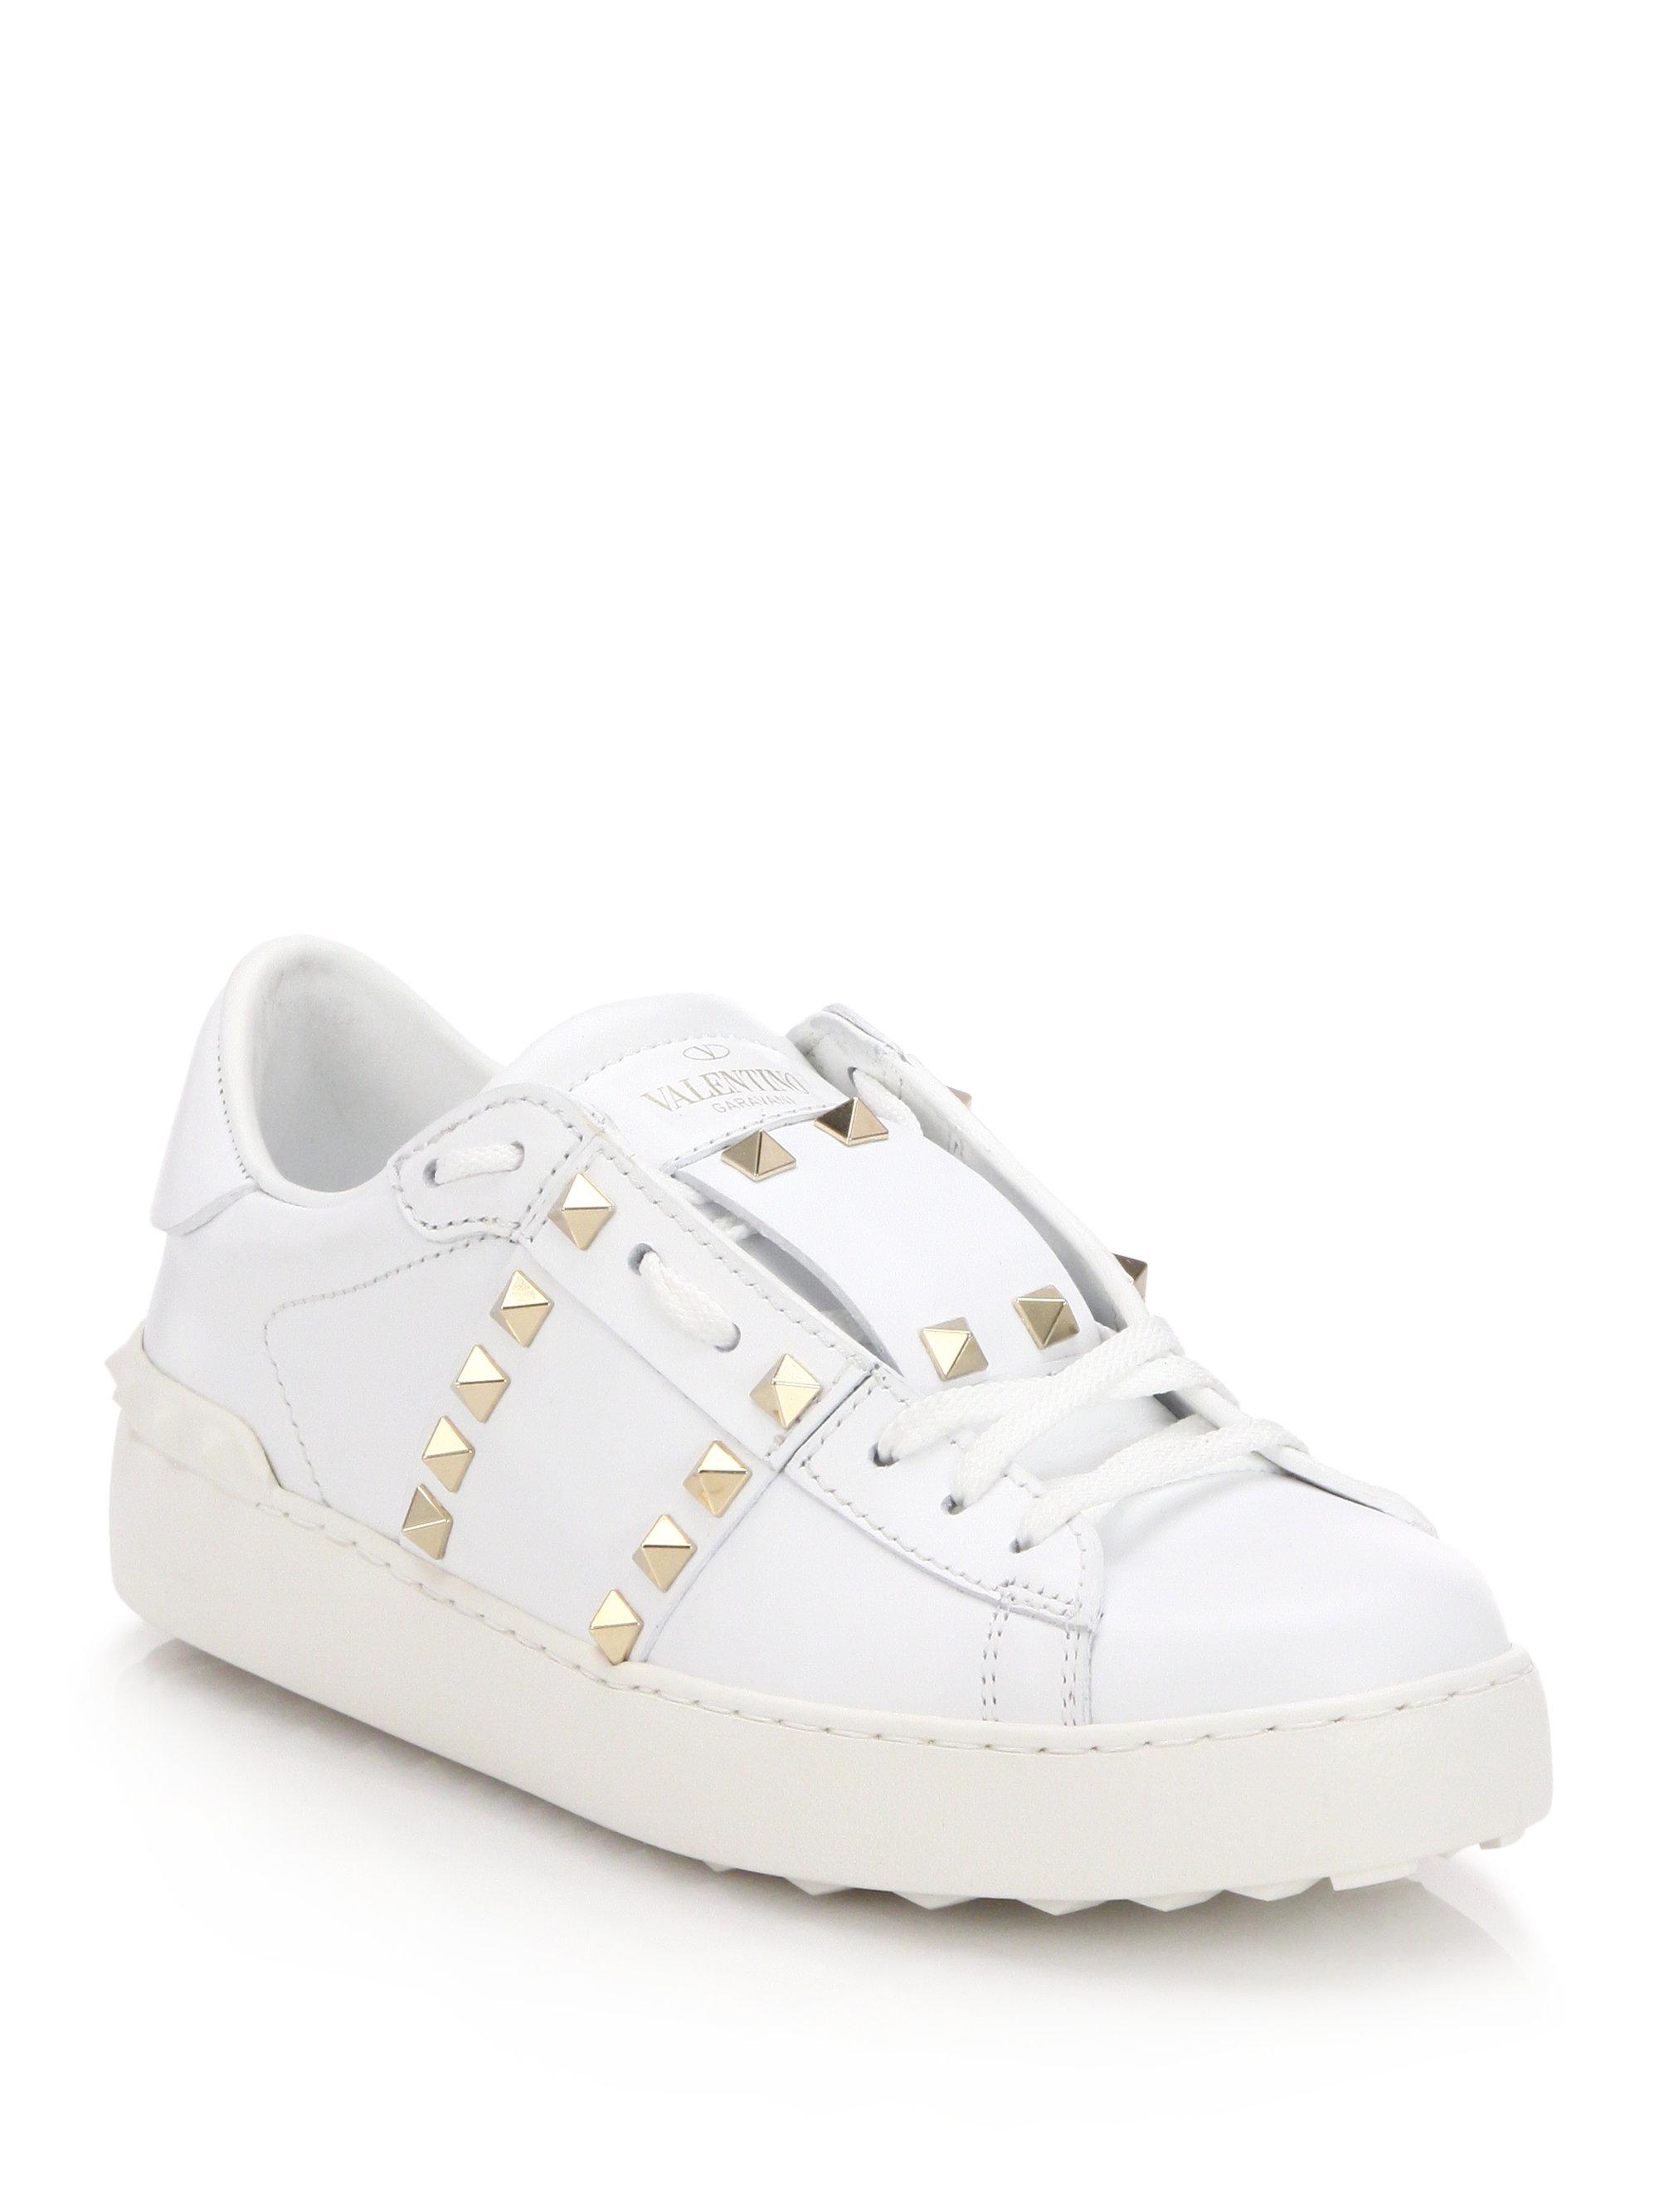 Valentino Rockstud Leather Sneakers in White - Lyst